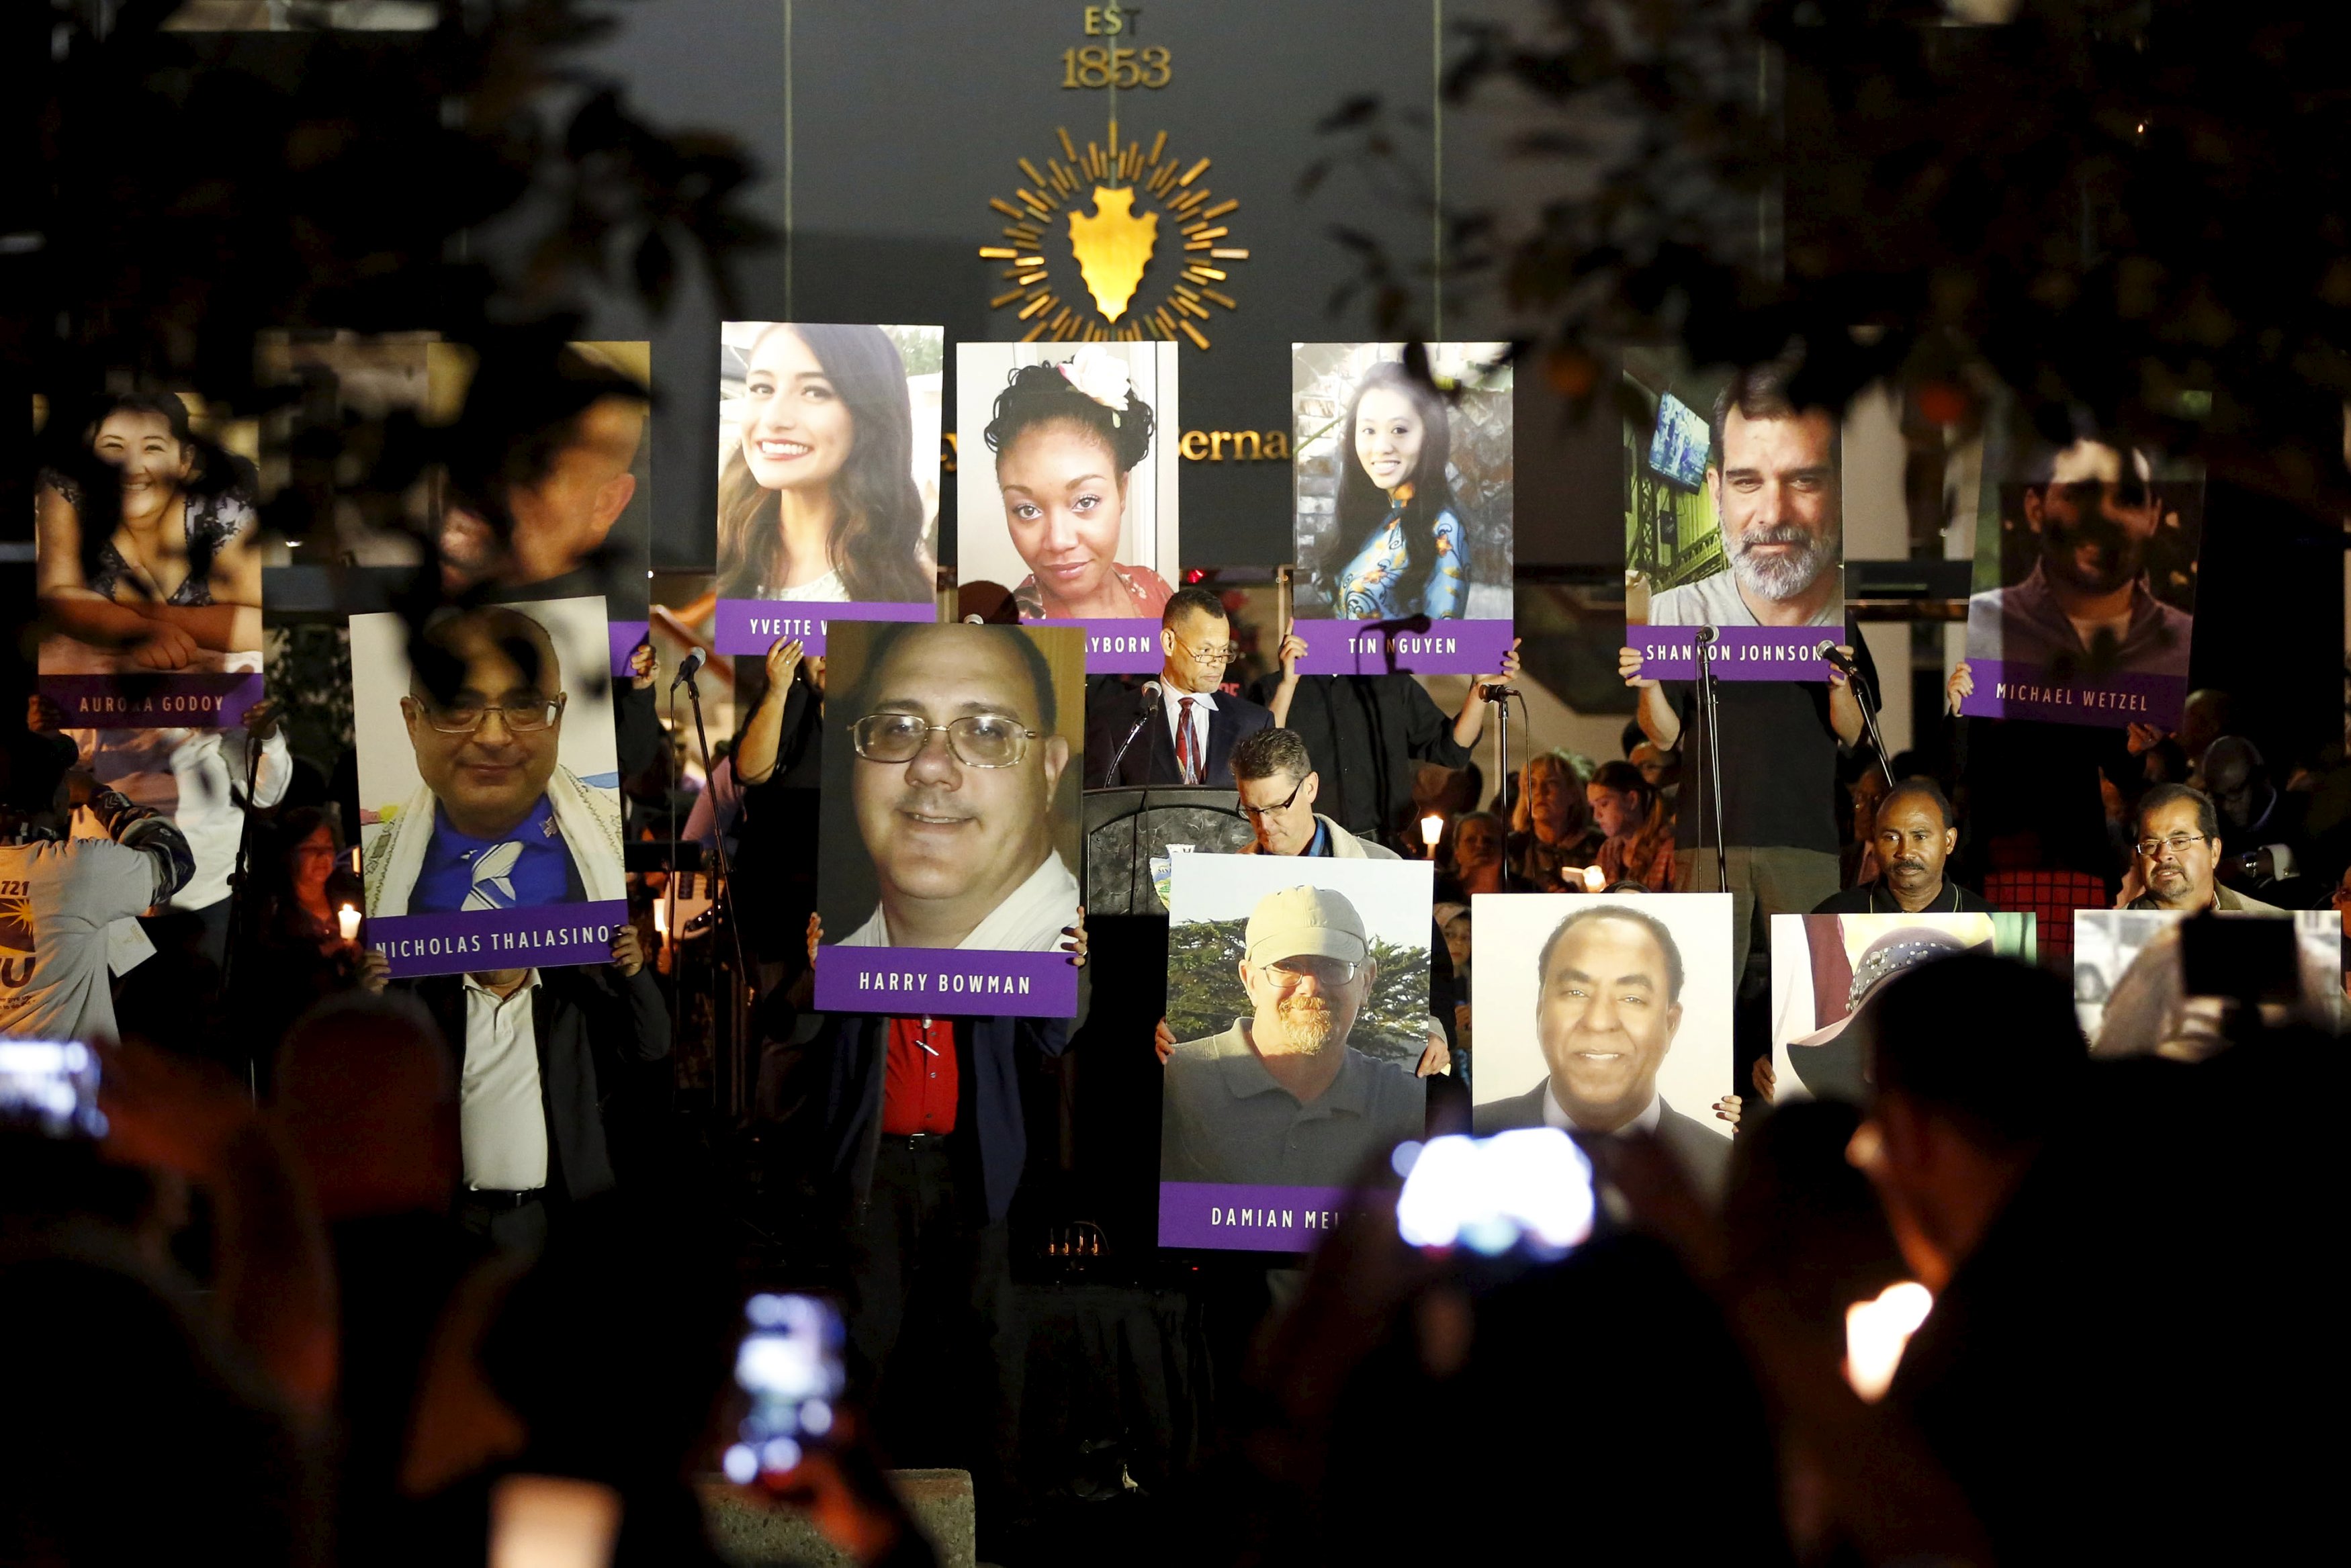 Posters of the 14 people killed in a Dec. 2 mass shooting at social services center in San Bernardino, Calif., are displayed during a Dec. 7 vigil in San Bernardino. (CNS/Reuters/Patrick T. Fallon)